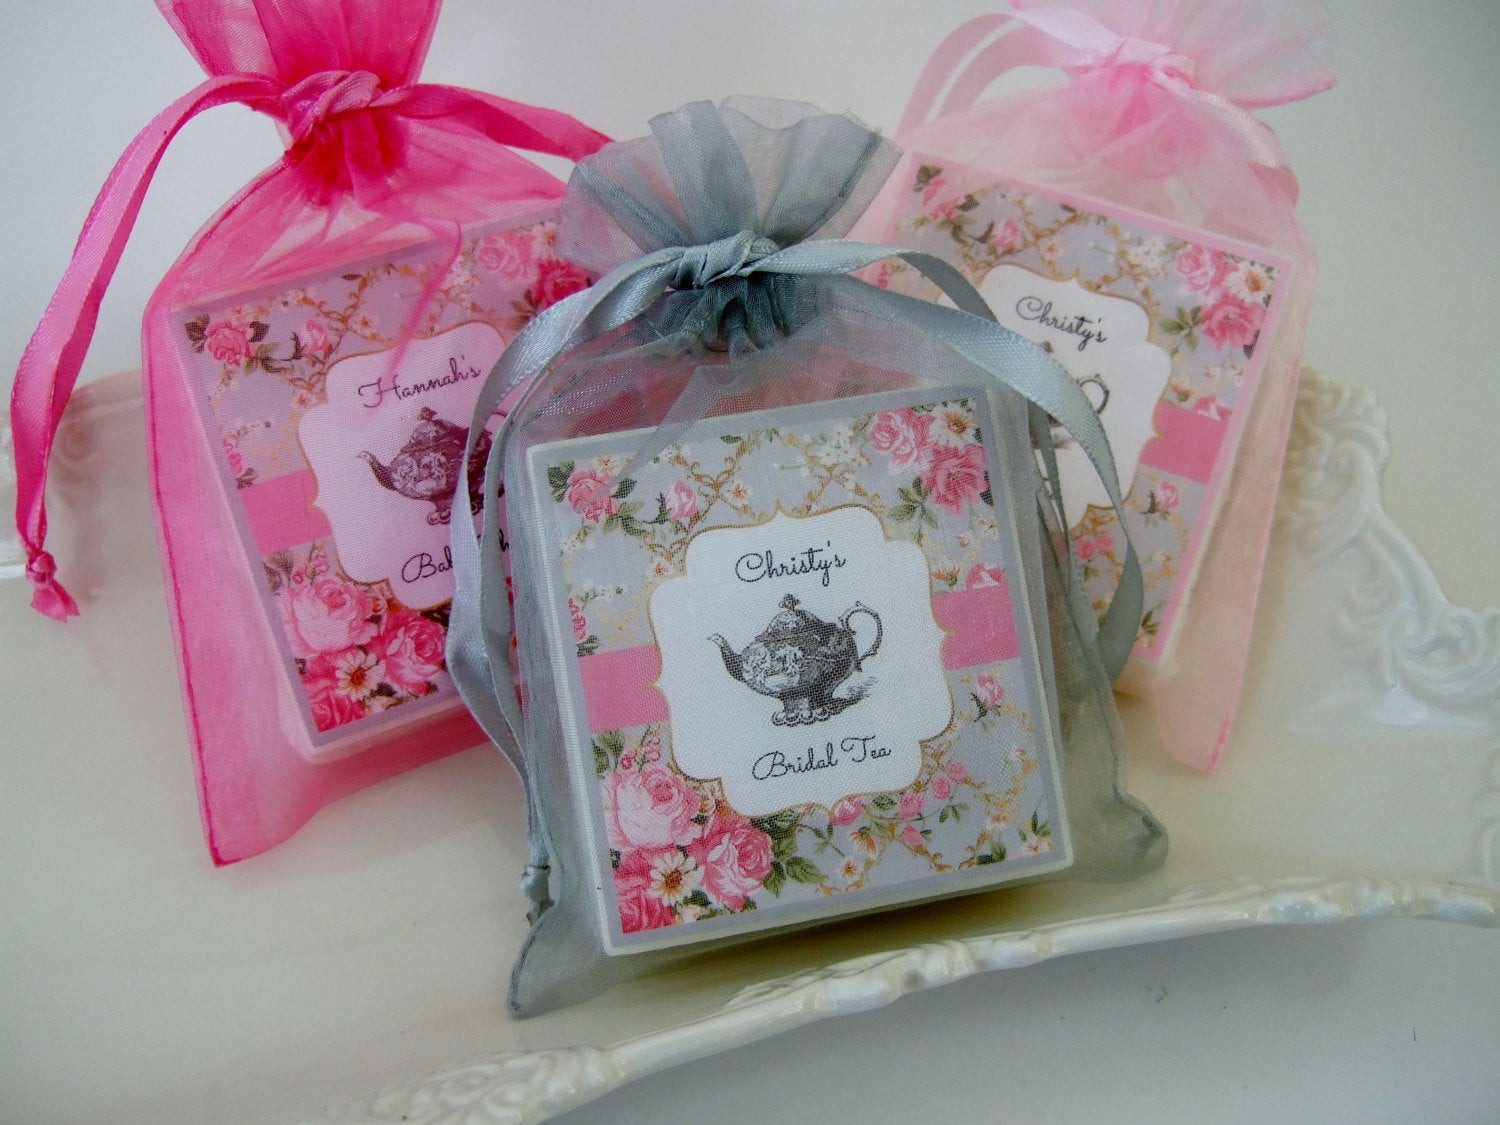 Party Favors For Baby Shower
 Tea Party Bridal Shower Favors Baby shower favors set of